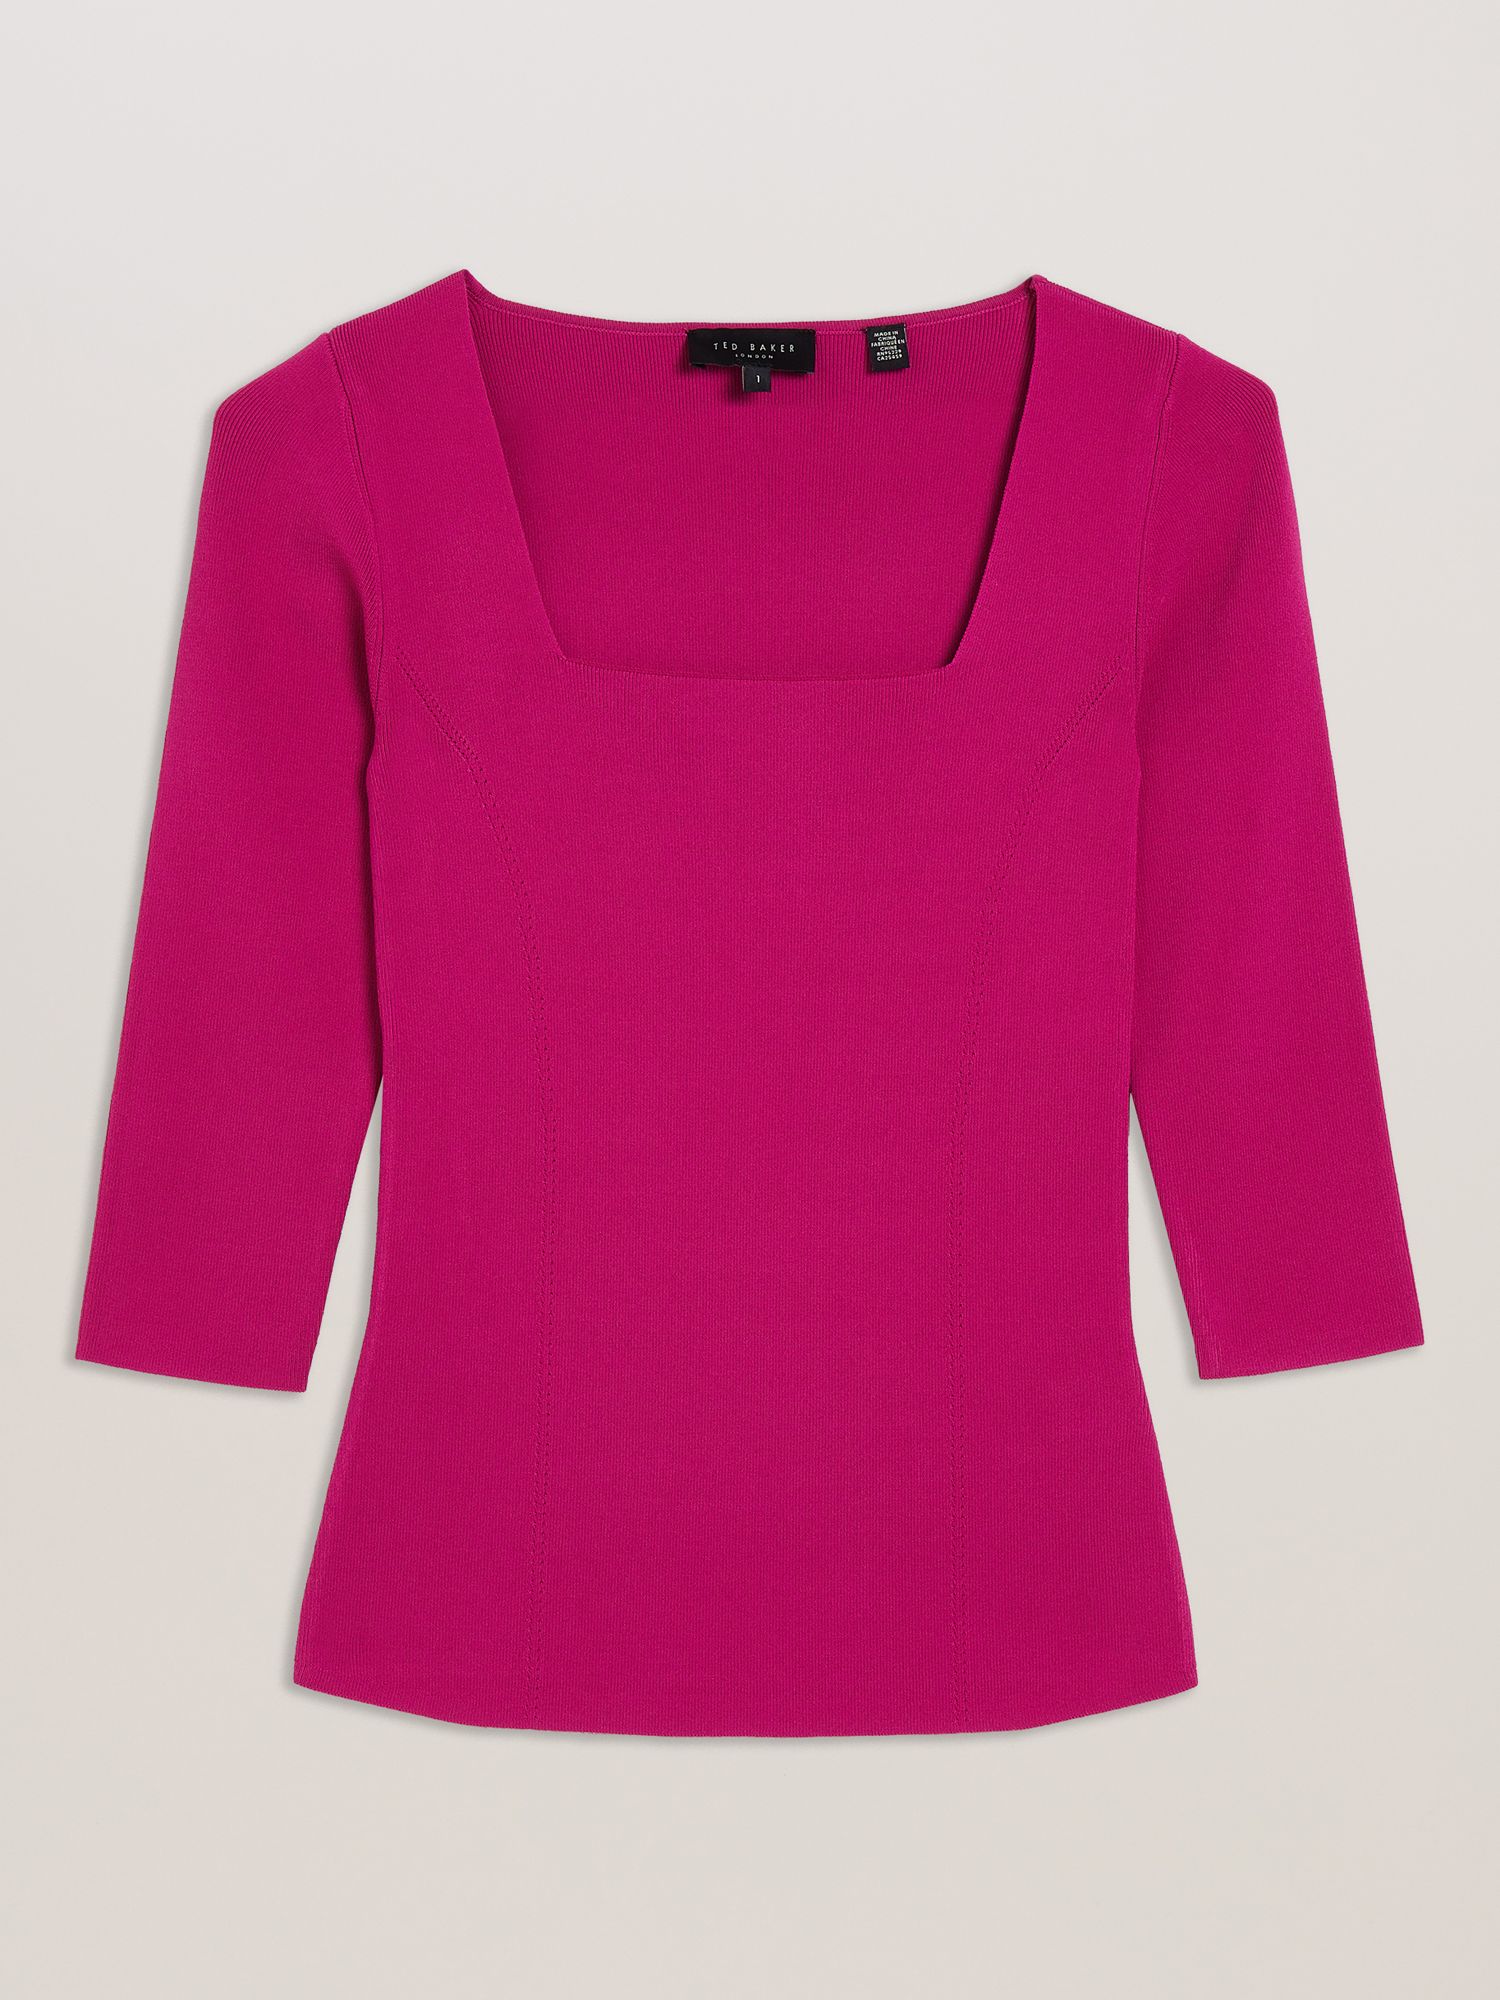 Buy Ted Baker Vallryy Square Neck Fitted Knit Top, Pink Hot Online at johnlewis.com